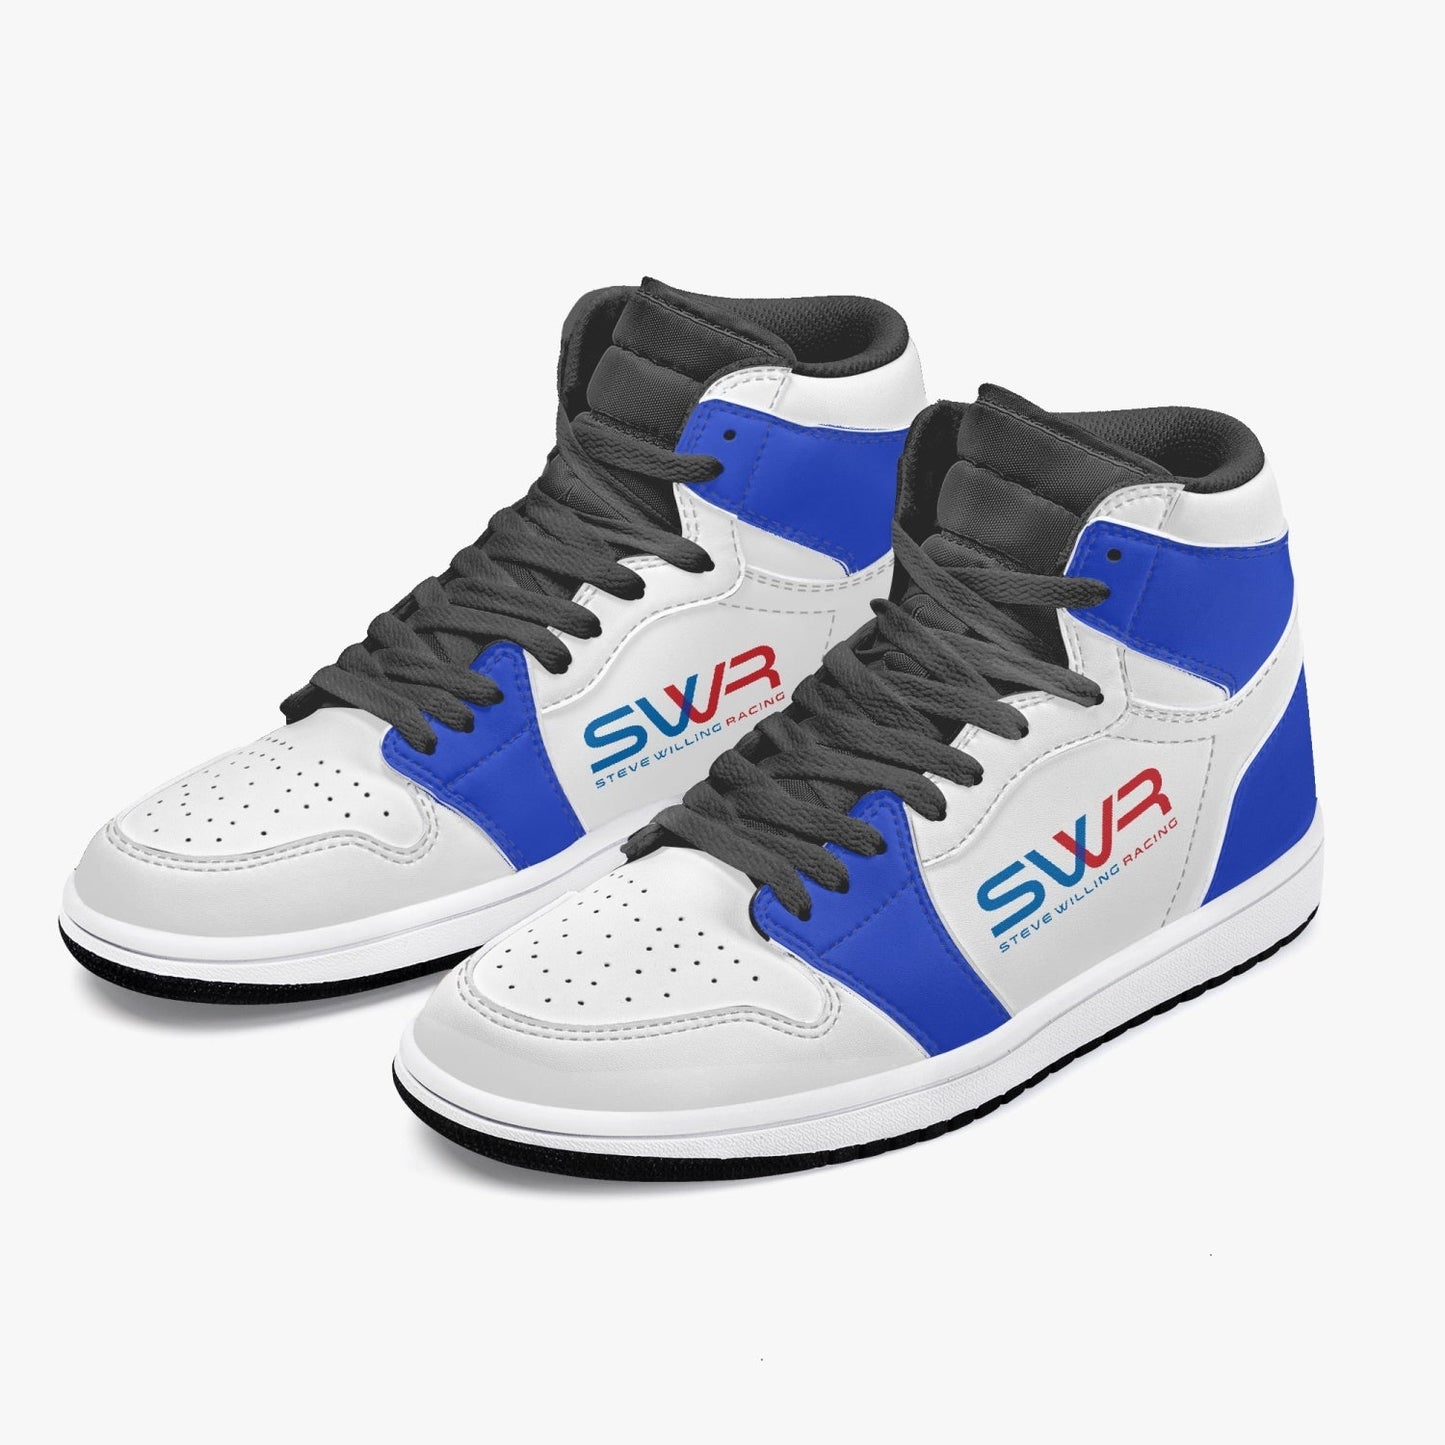 STEVE WILLING F2 MARCH version 3 High-Top Leather Sneakers - white/blue/carbon